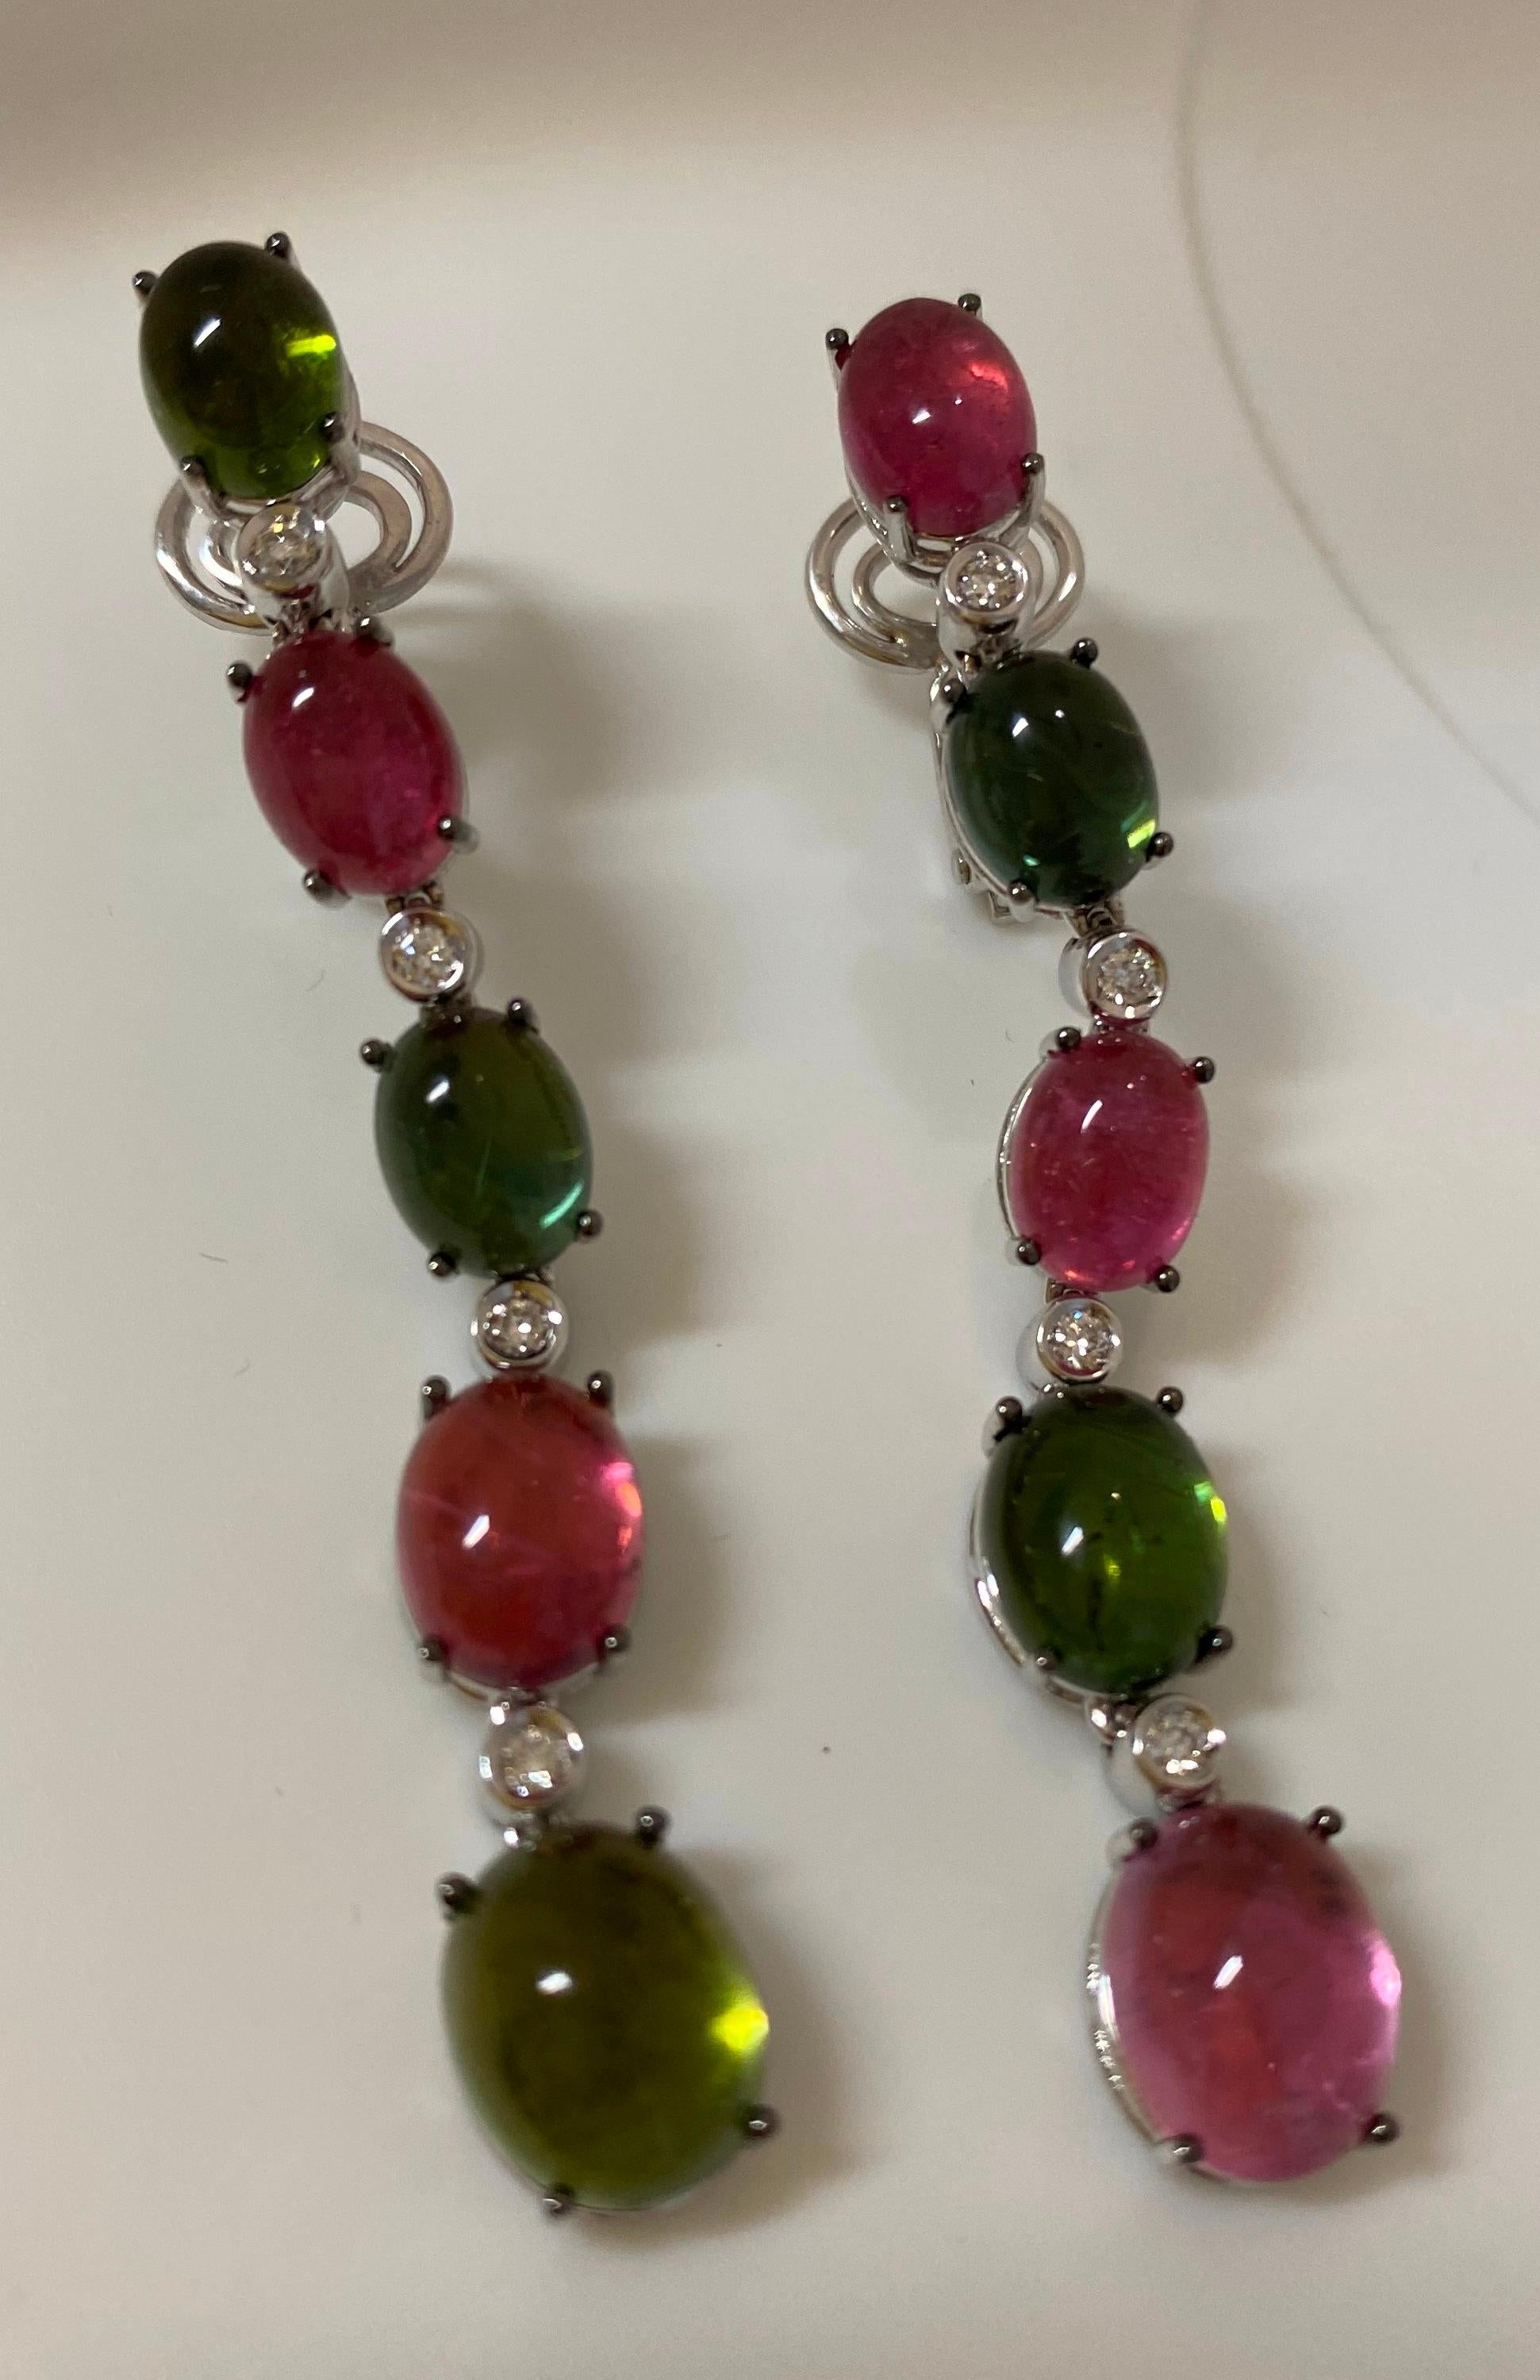 18 Karat White Gold Diamond  and Tourmaline  Dangle Earrings

8 Diamonds 0,19 Carat
5  Tourmaline  rose 9,47 Carat
5 Tourmaline green 10,28 Carat





Founded in 1974, Gianni Lazzaro is a family-owned jewelery company based out of Düsseldorf,